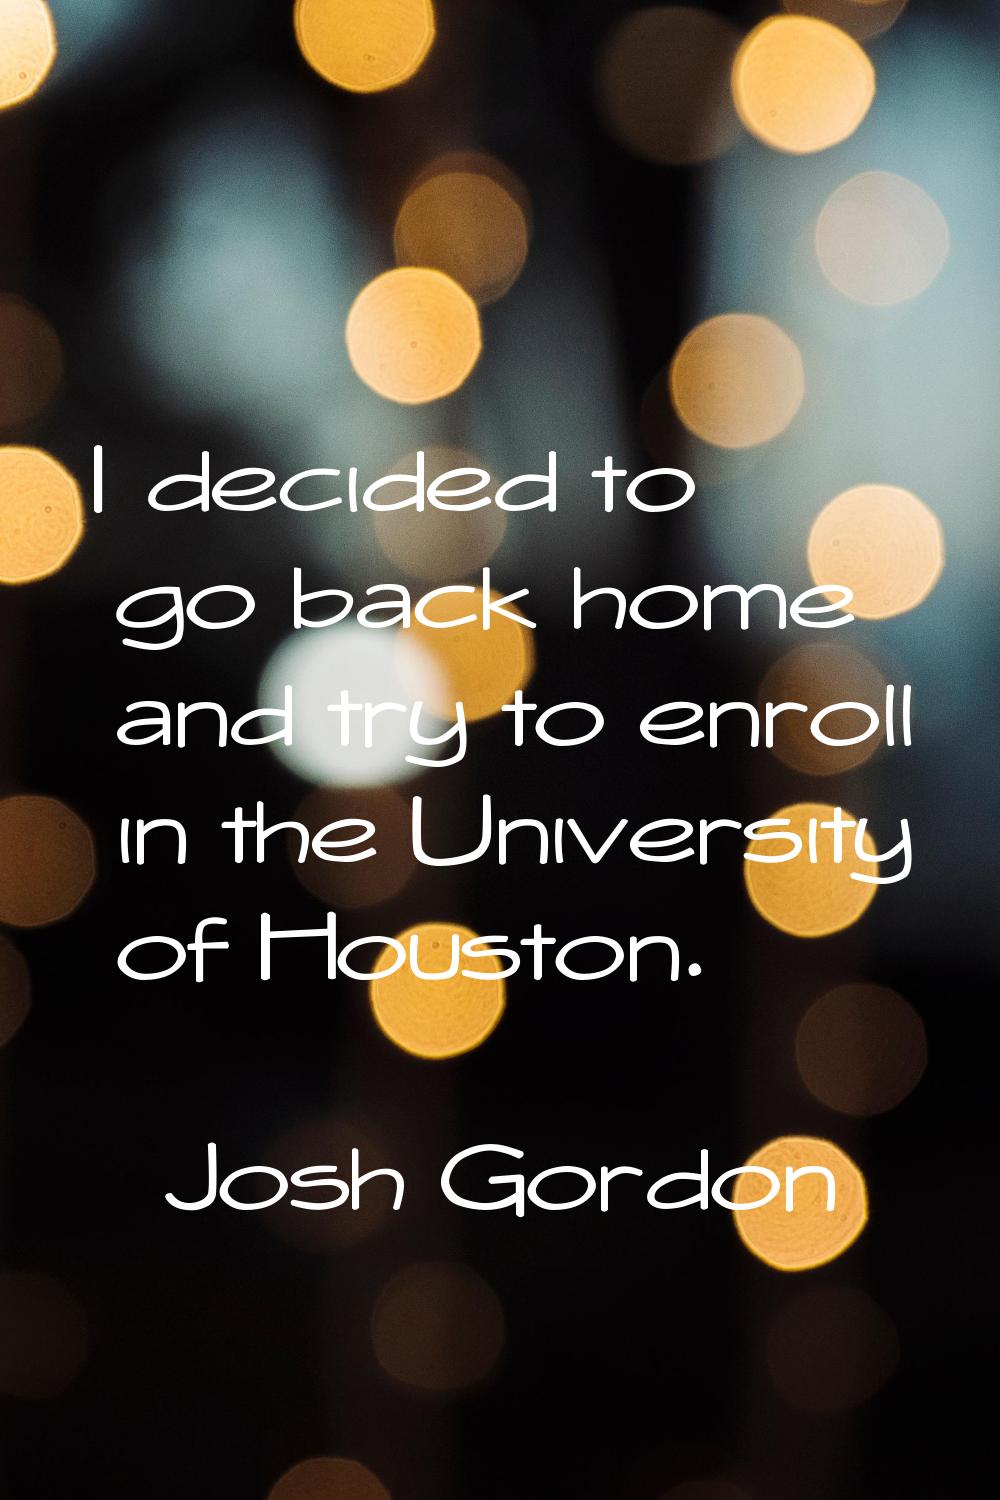 I decided to go back home and try to enroll in the University of Houston.